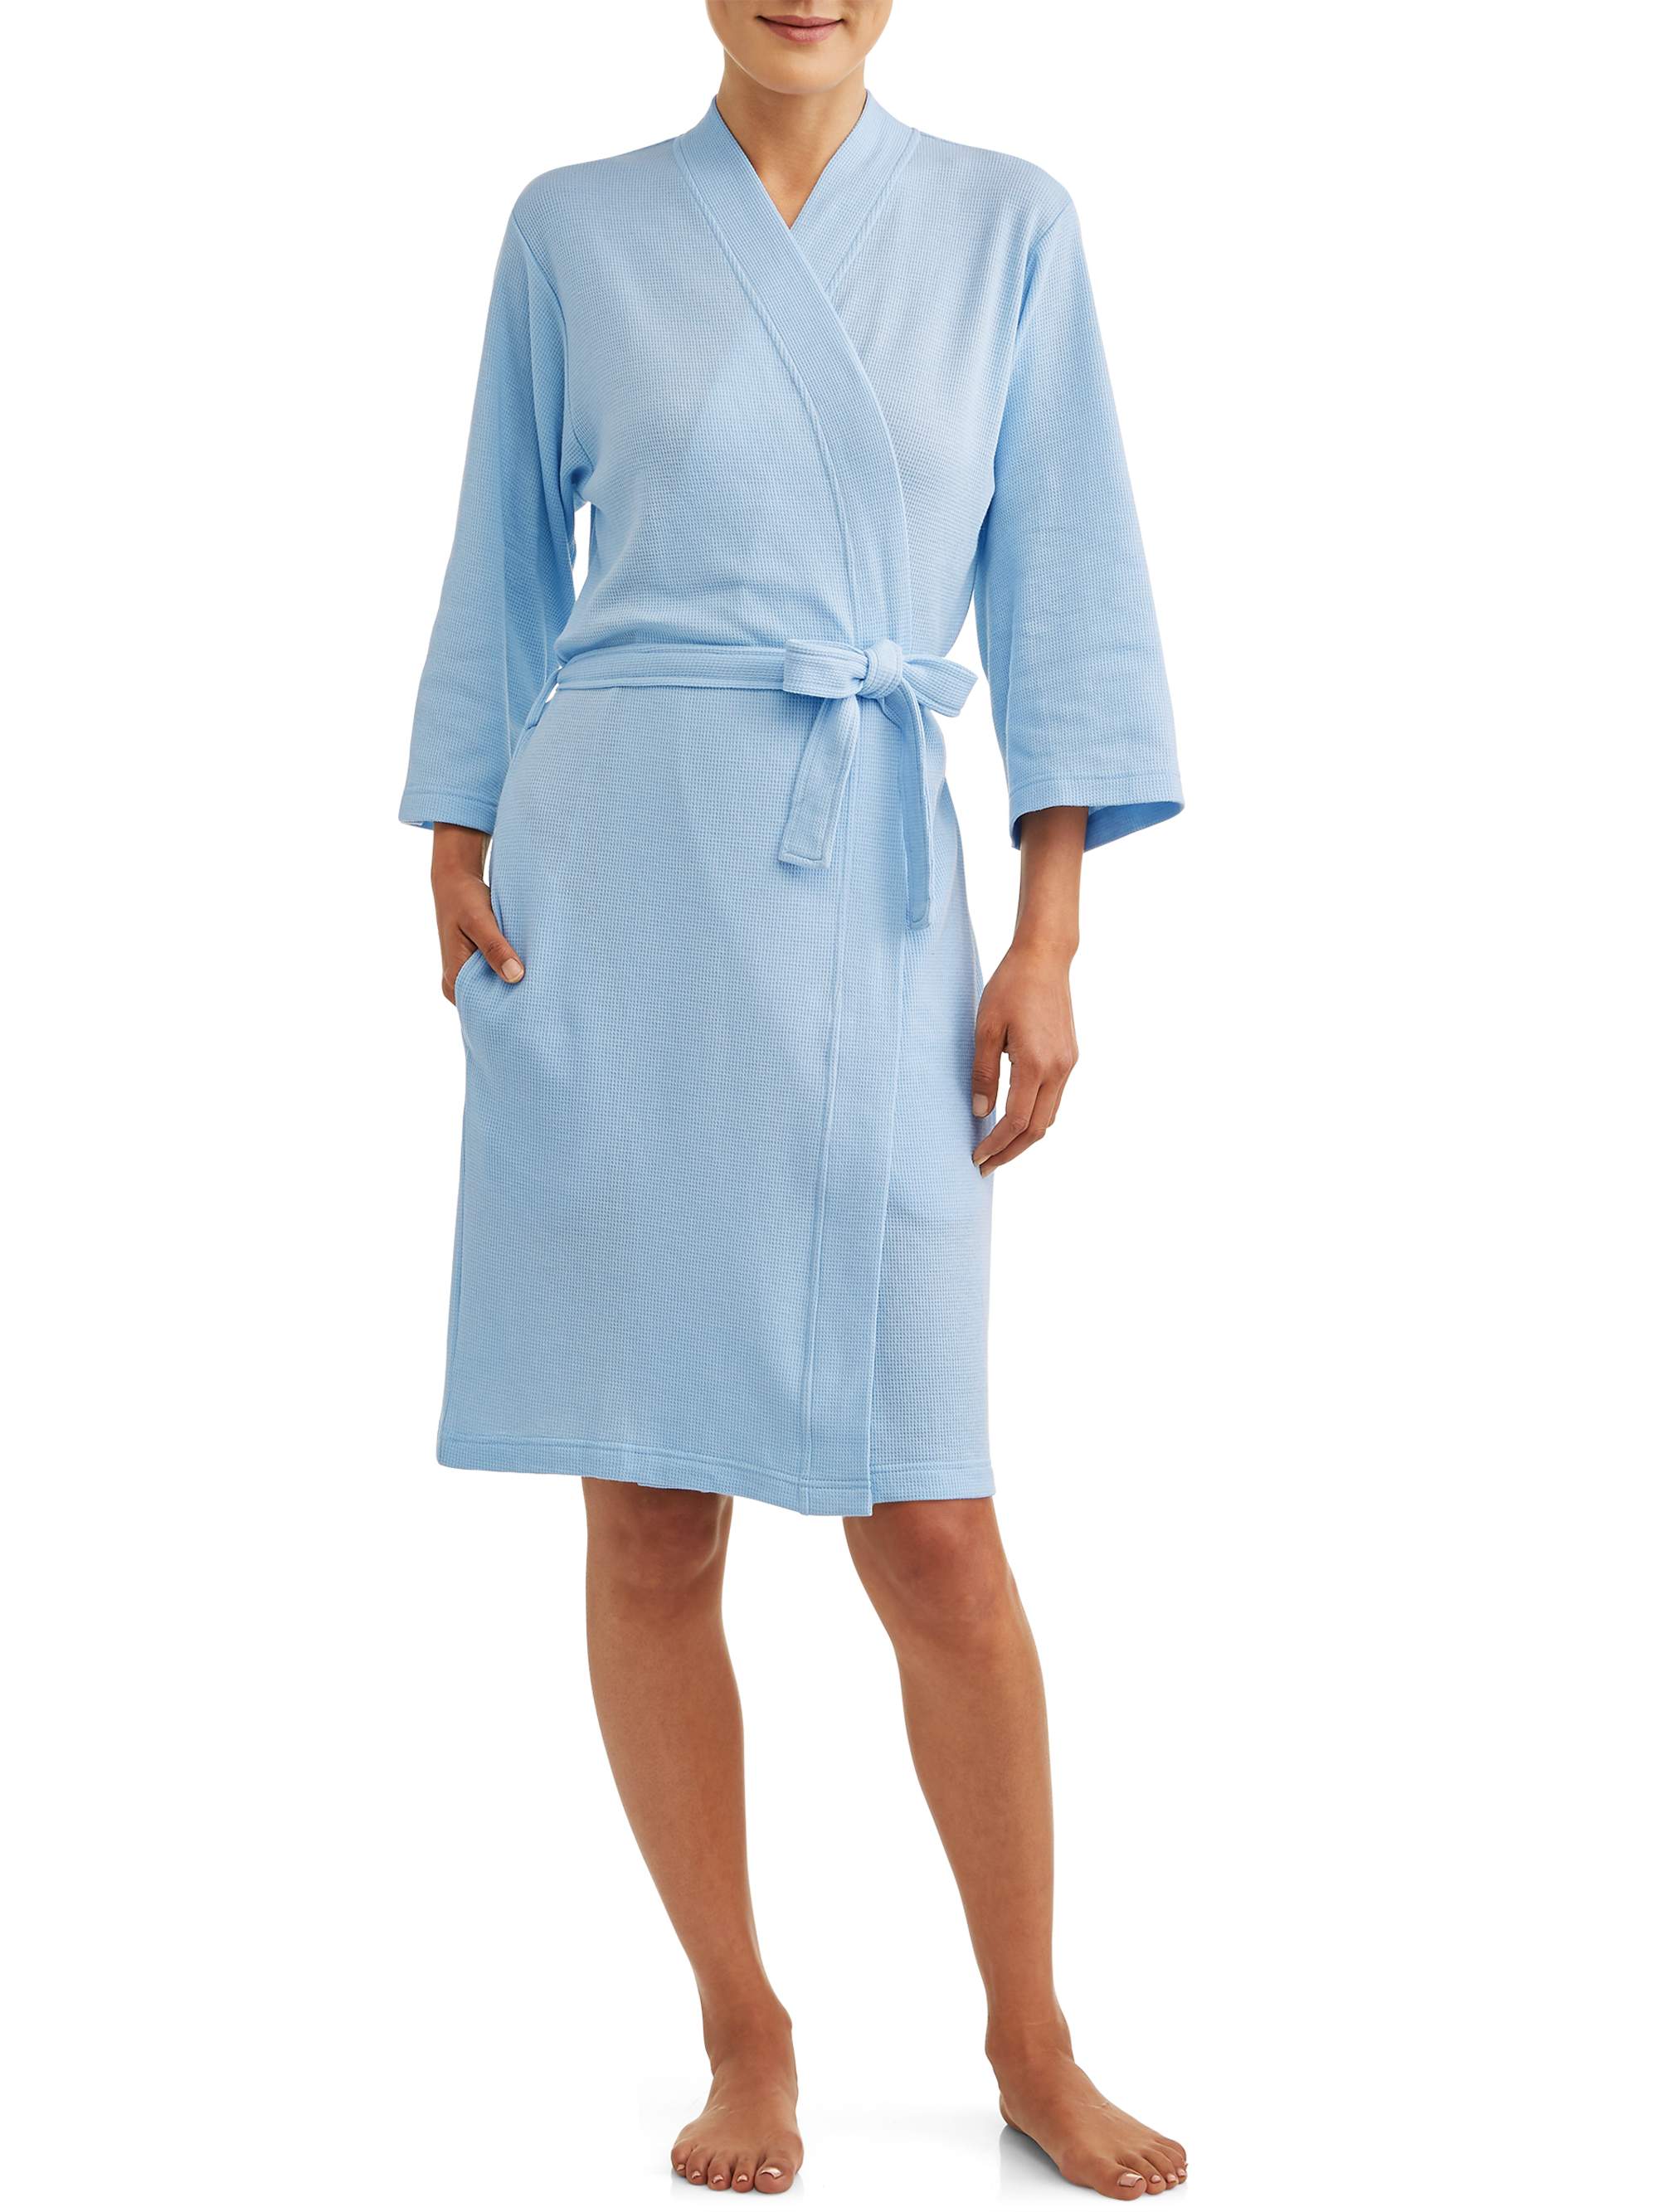 Lissome Women's and Women's Plus Waffle Wrap Robe - image 1 of 3